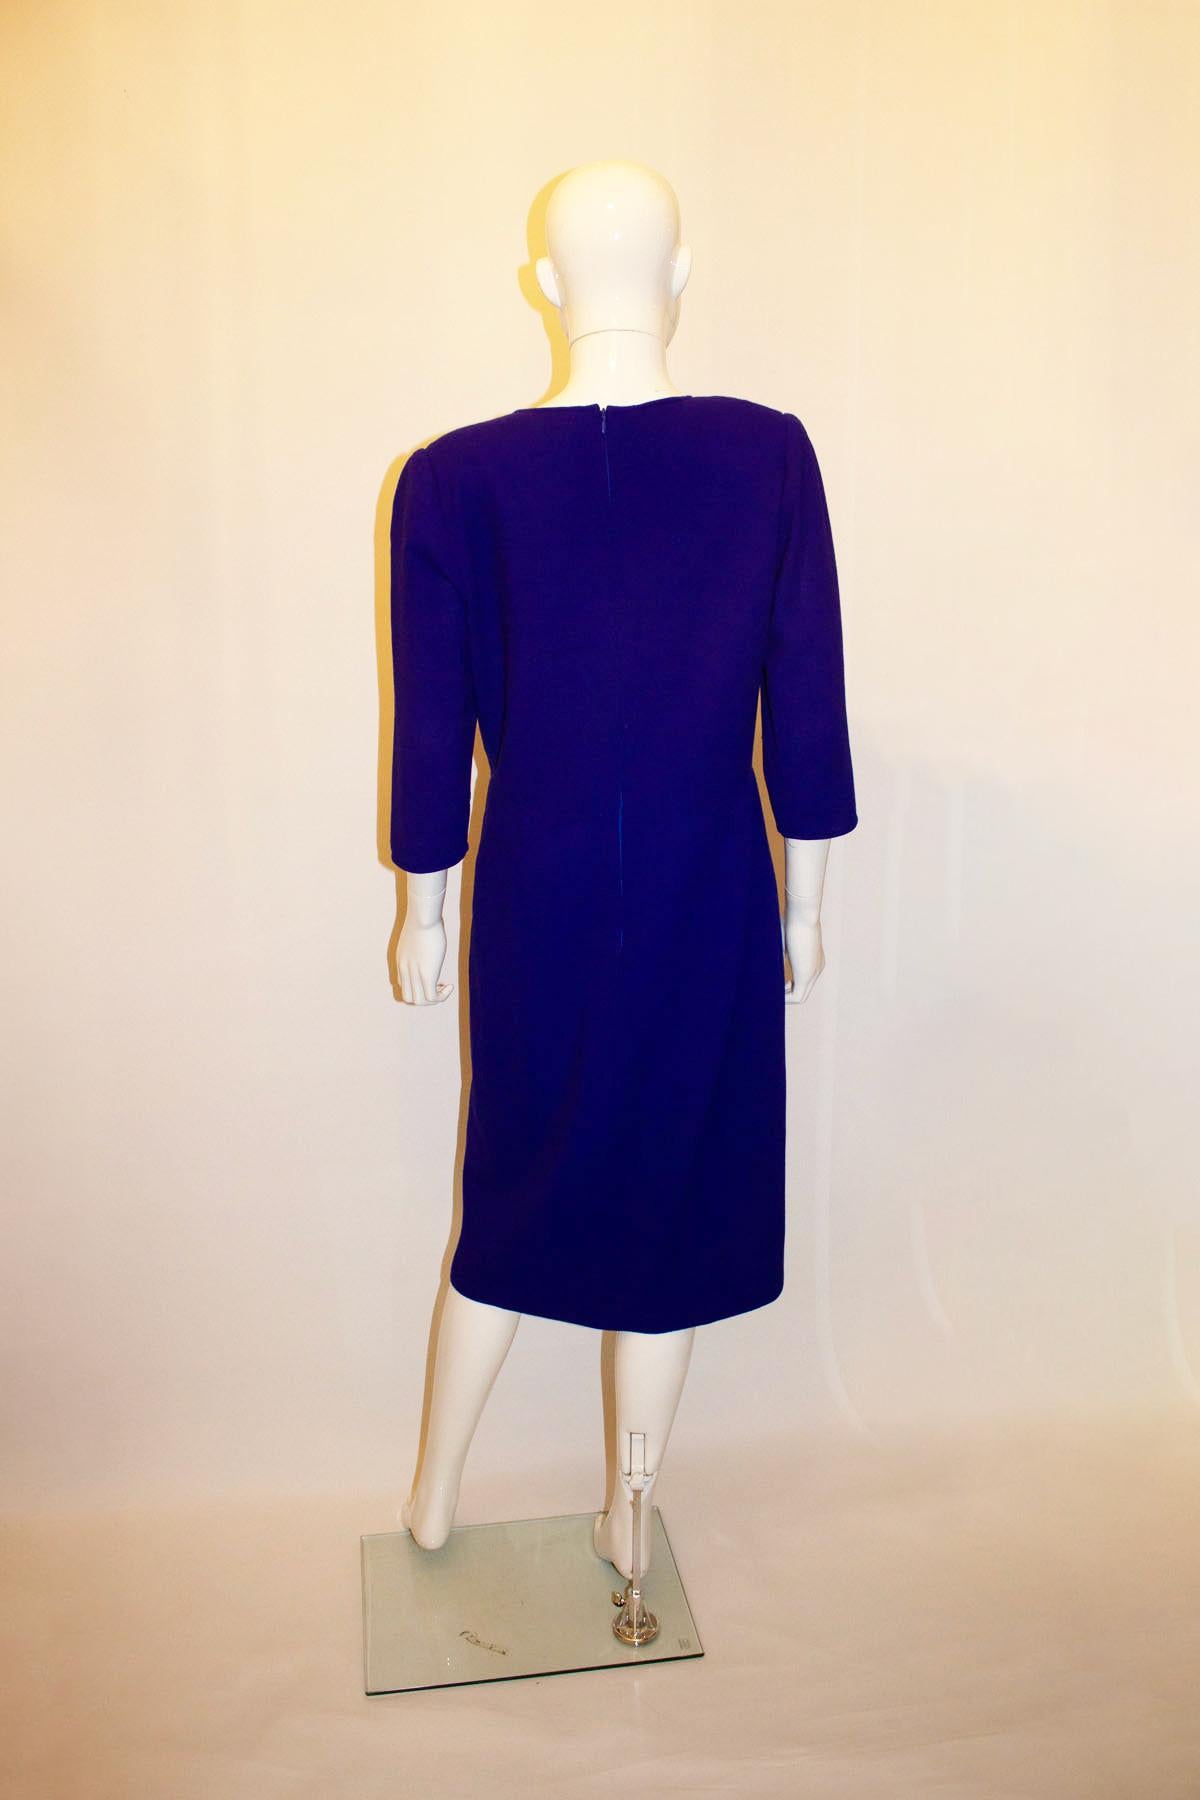 Vintage Frances Retry Roma Purple Crepe Dress In Good Condition For Sale In London, GB